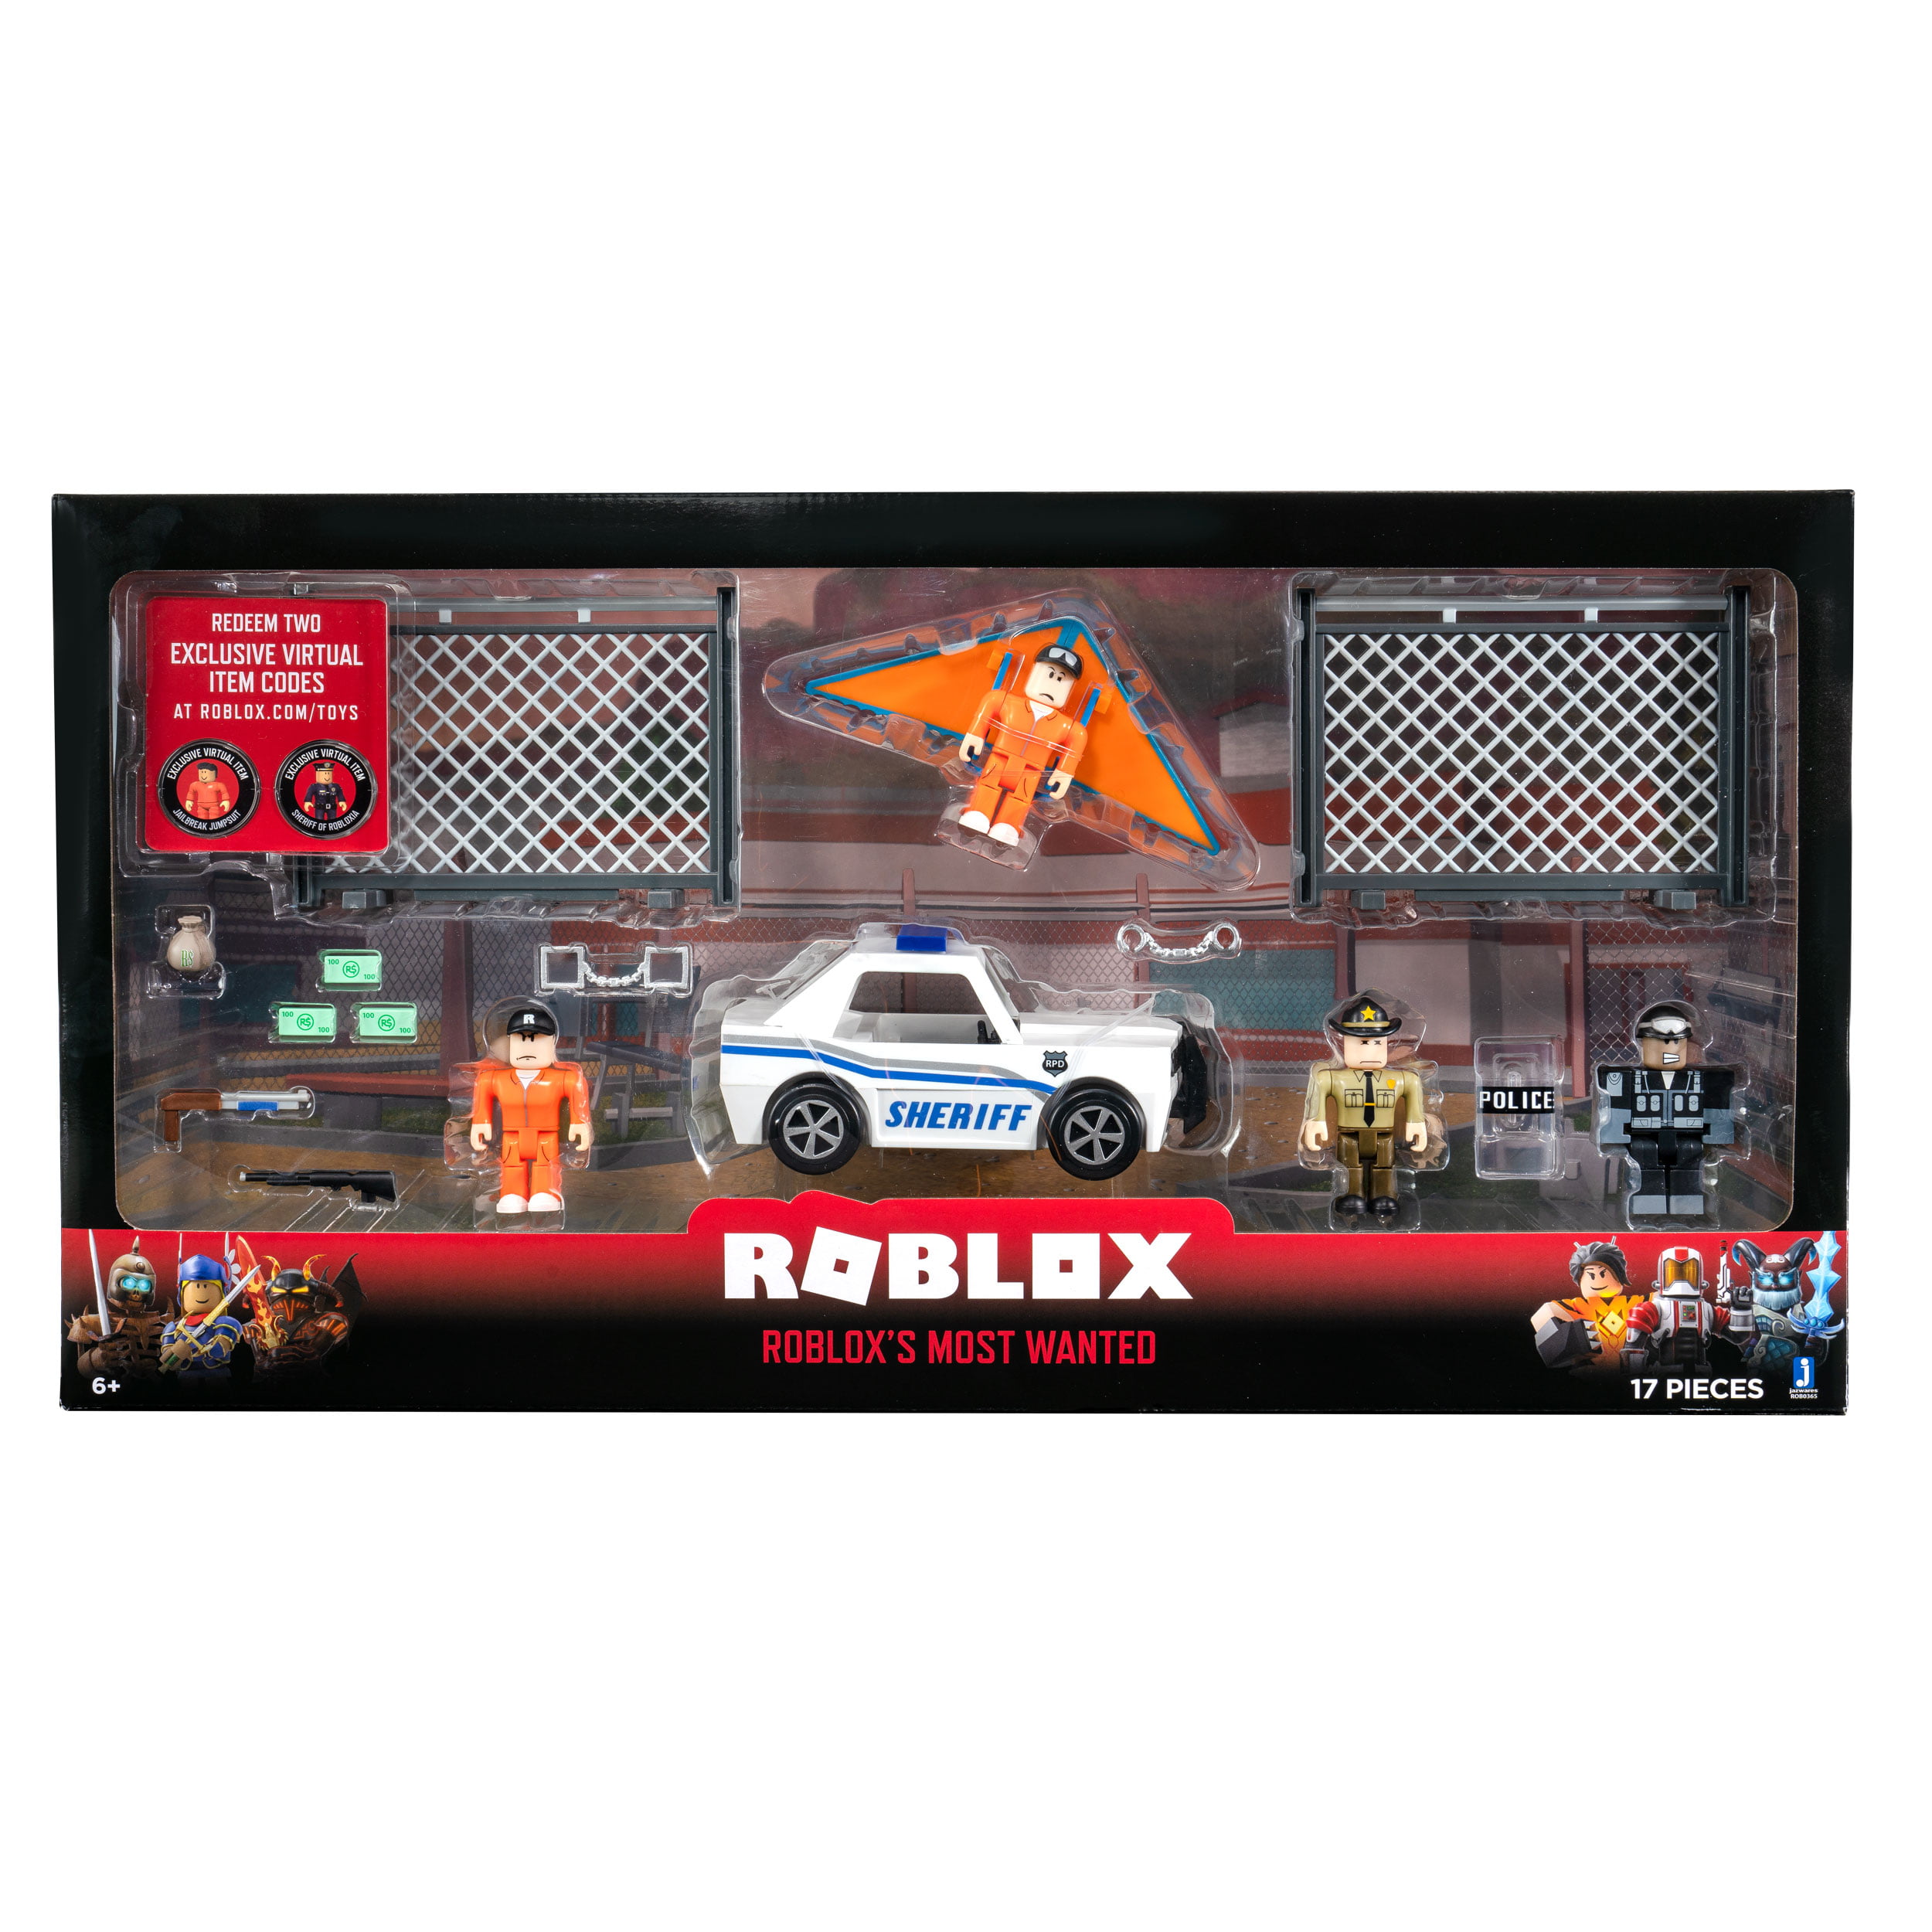 Roblox Action Collection Roblox S Most Wanted Playset Includes 2 Exclusive Virtual Items Walmart Com Walmart Com - tool keeps falling apart roblox studio